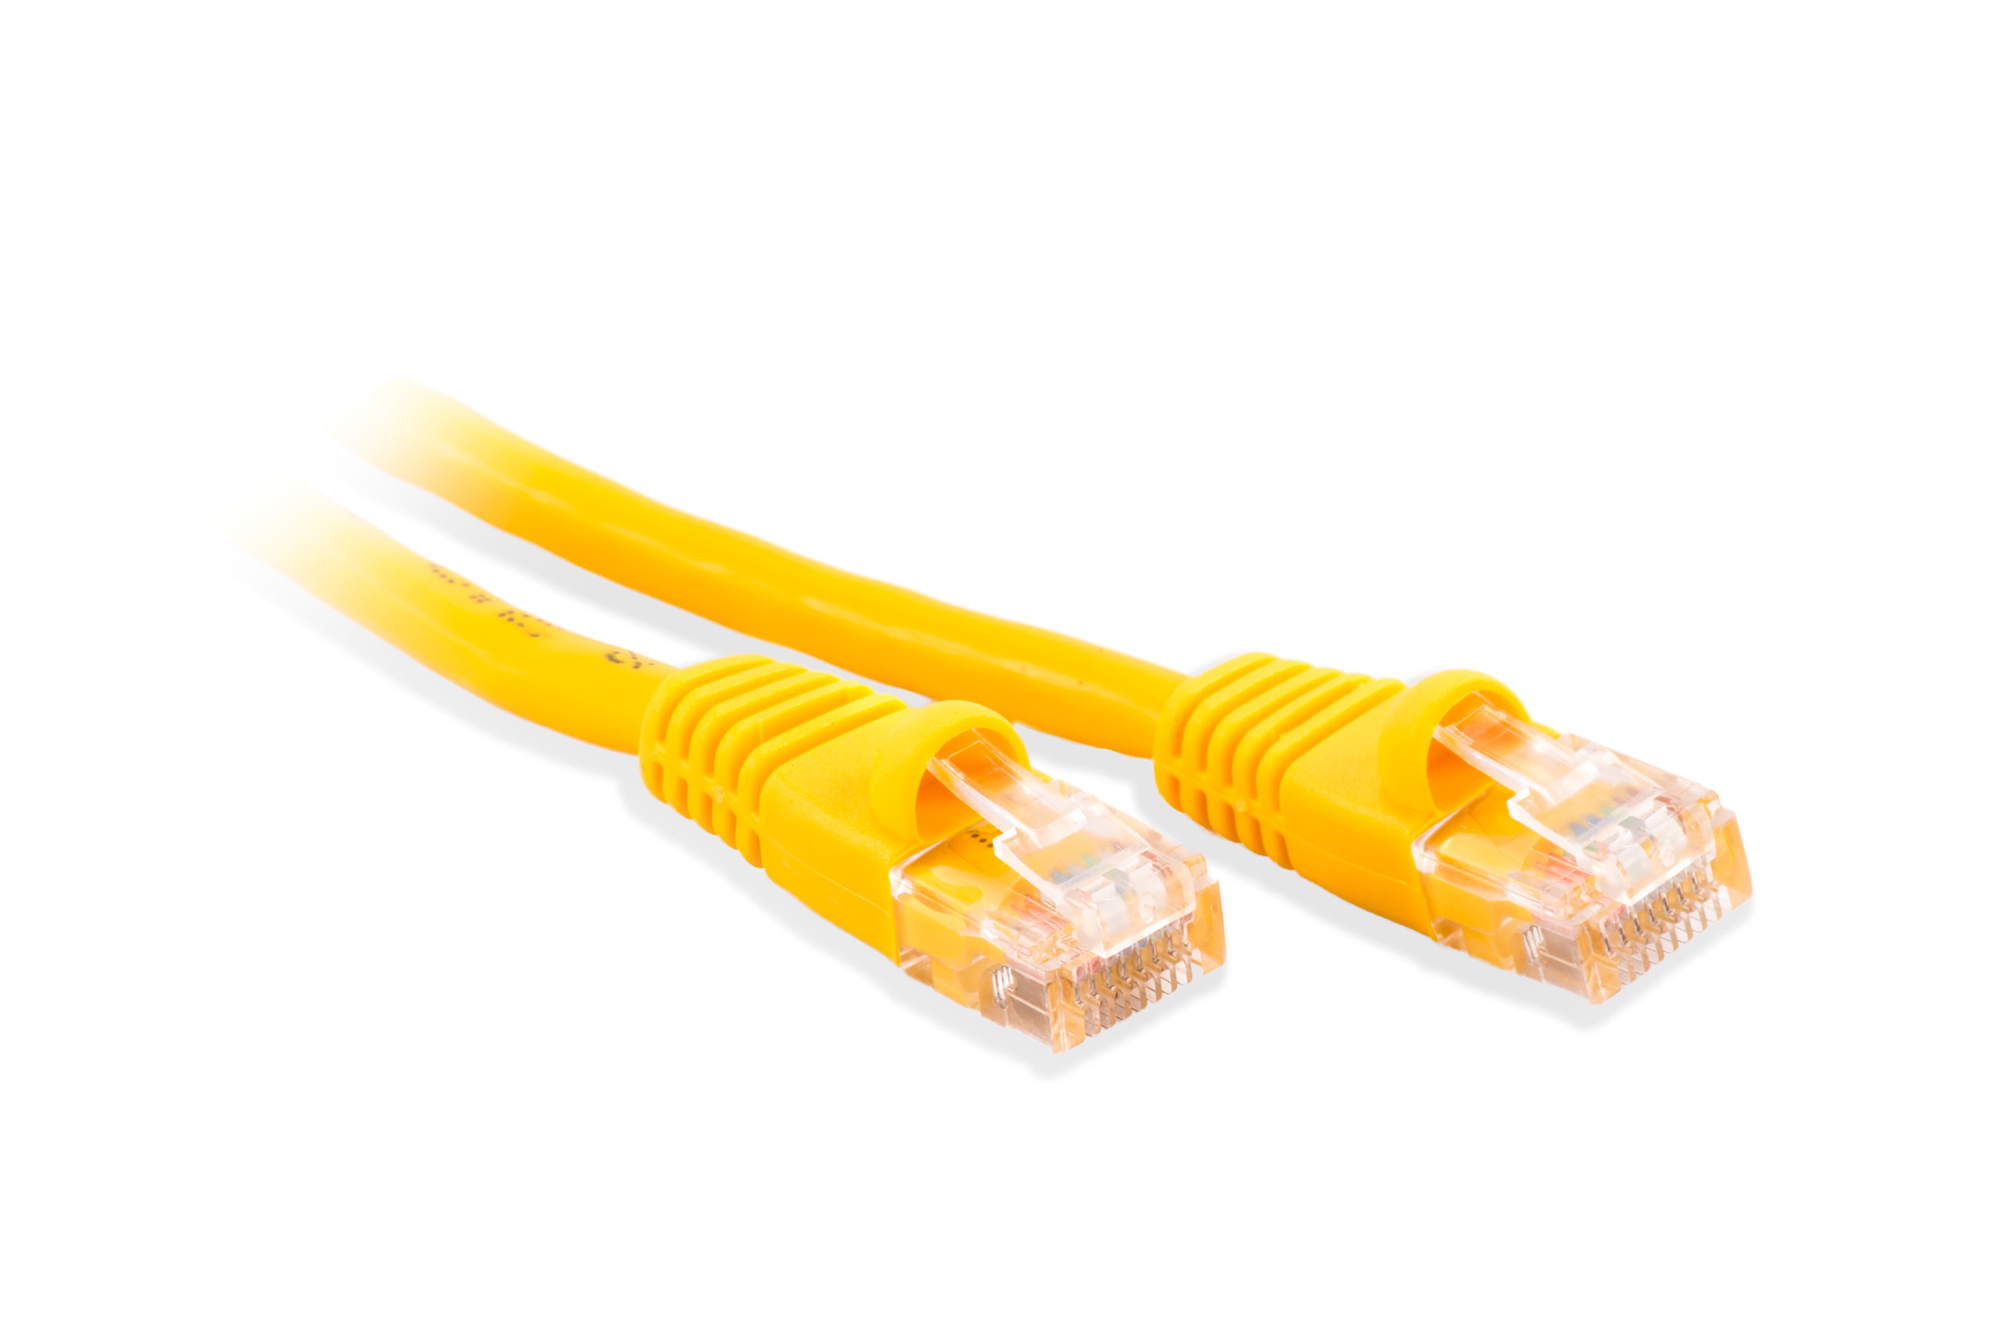 25ft Cat5e Ethernet Patch Cable - Yellow Color - Snagless Boot, Stranded, RJ45, 350Mhz, 24AWG